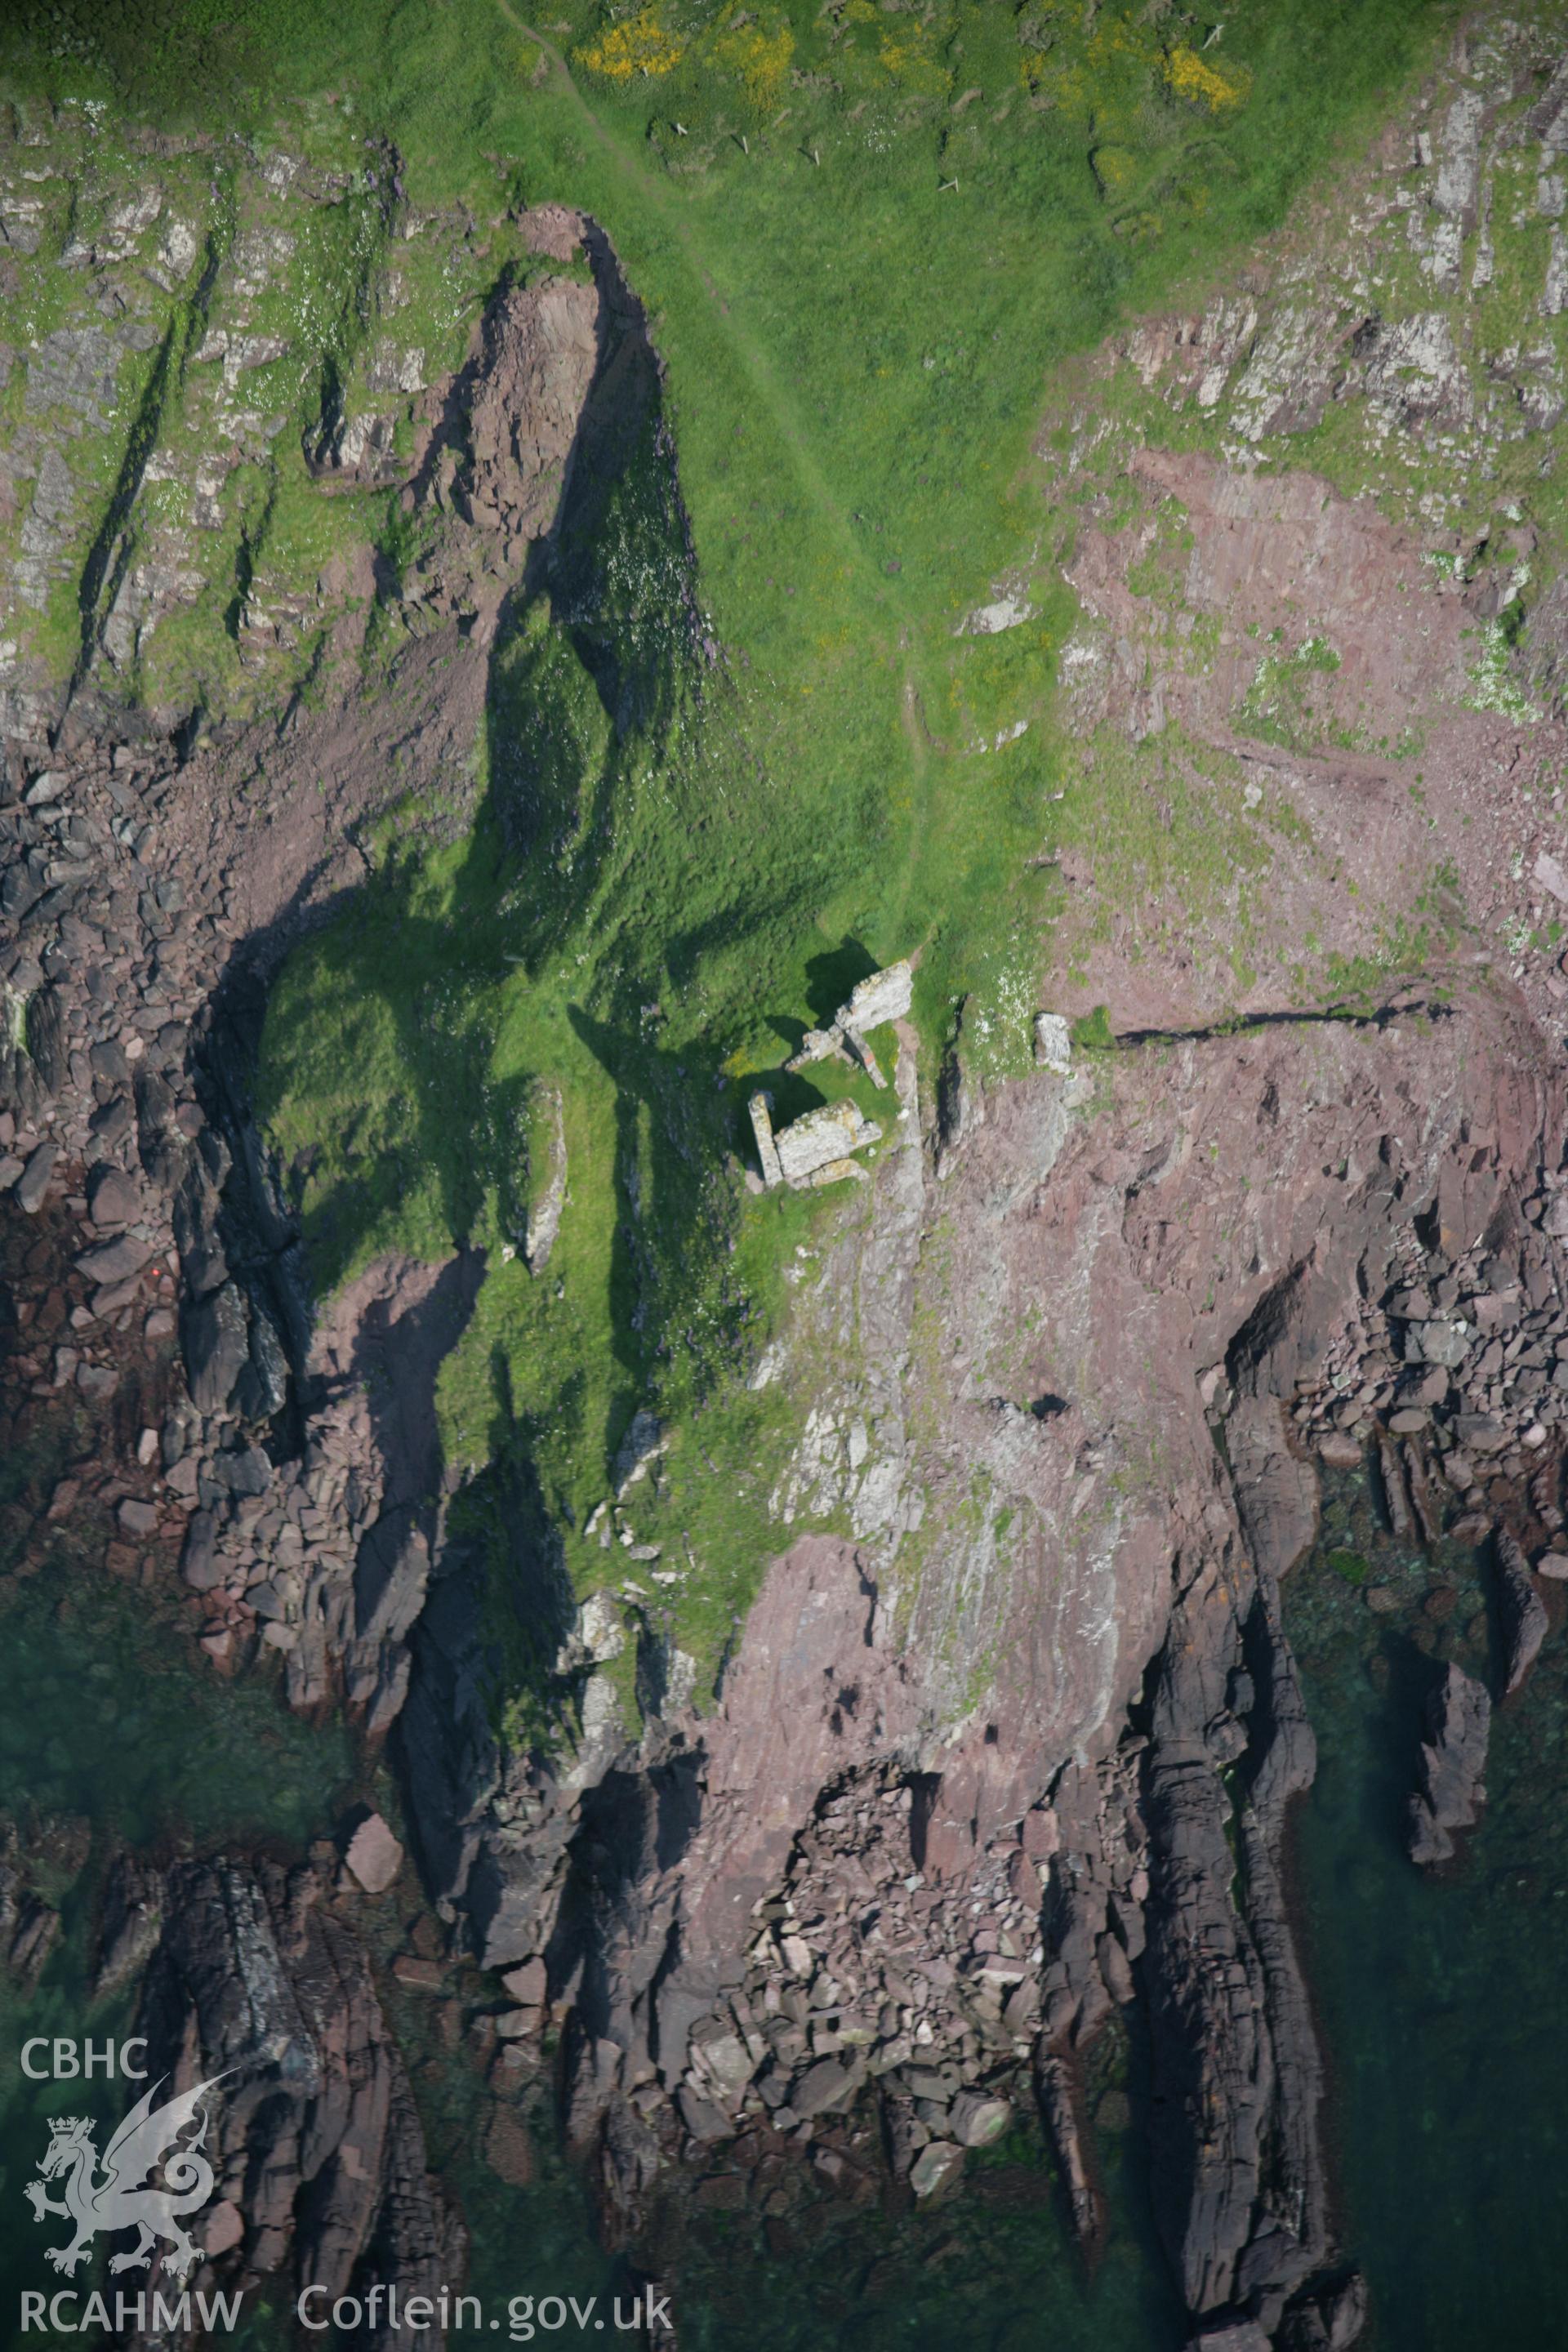 RCAHMW colour oblique aerial photograph of East Blockhouse, Angle viewed from the west. Taken on 08 June 2006 by Toby Driver.